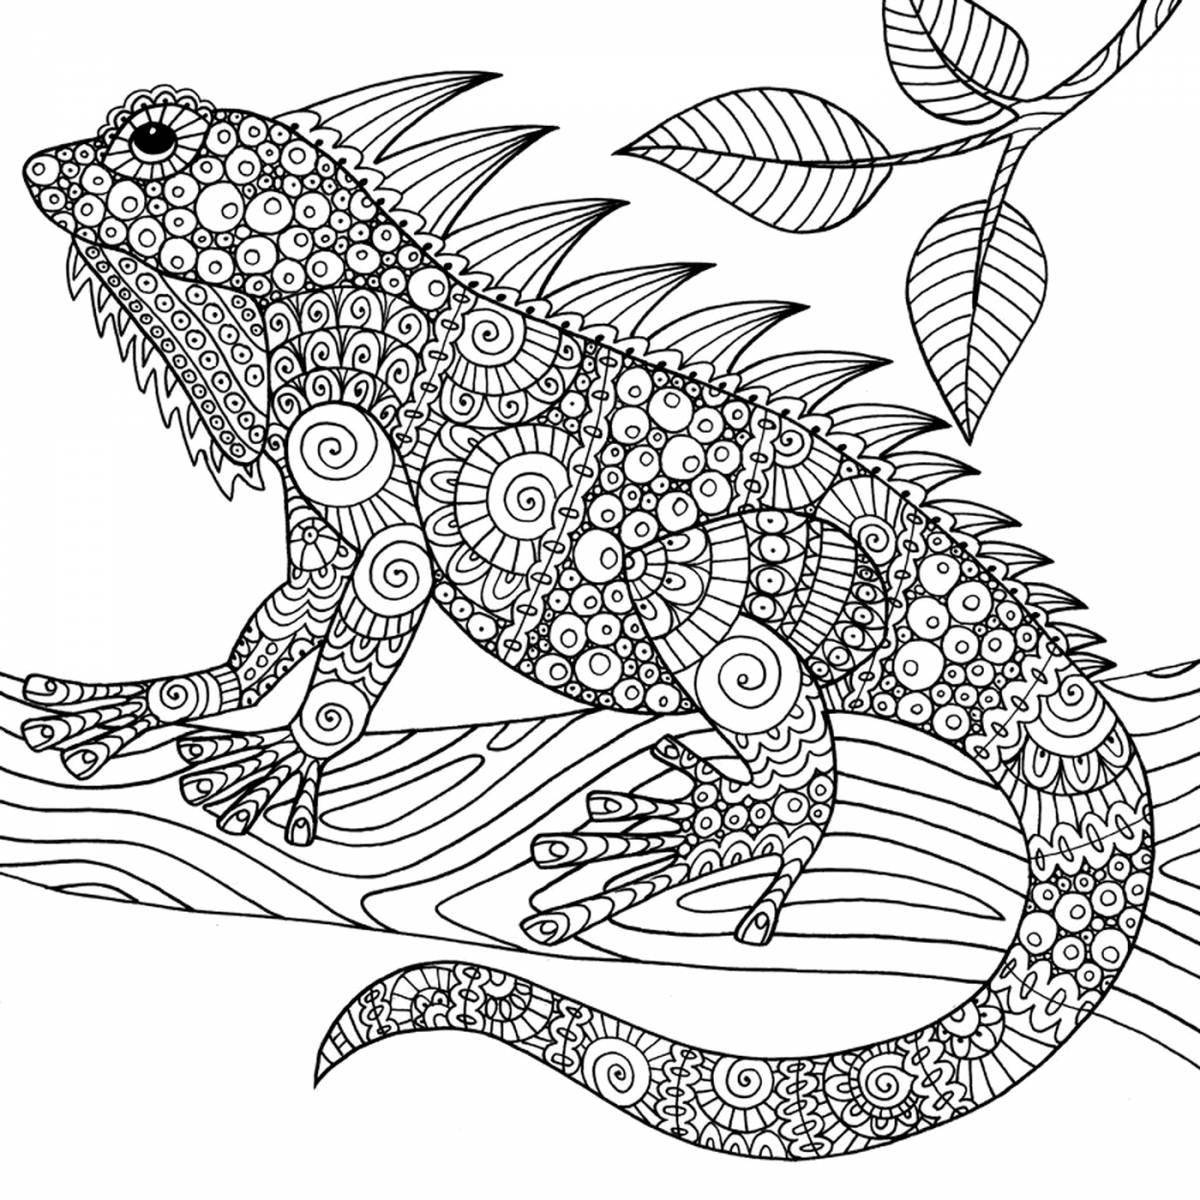 Great amazing animals coloring pages